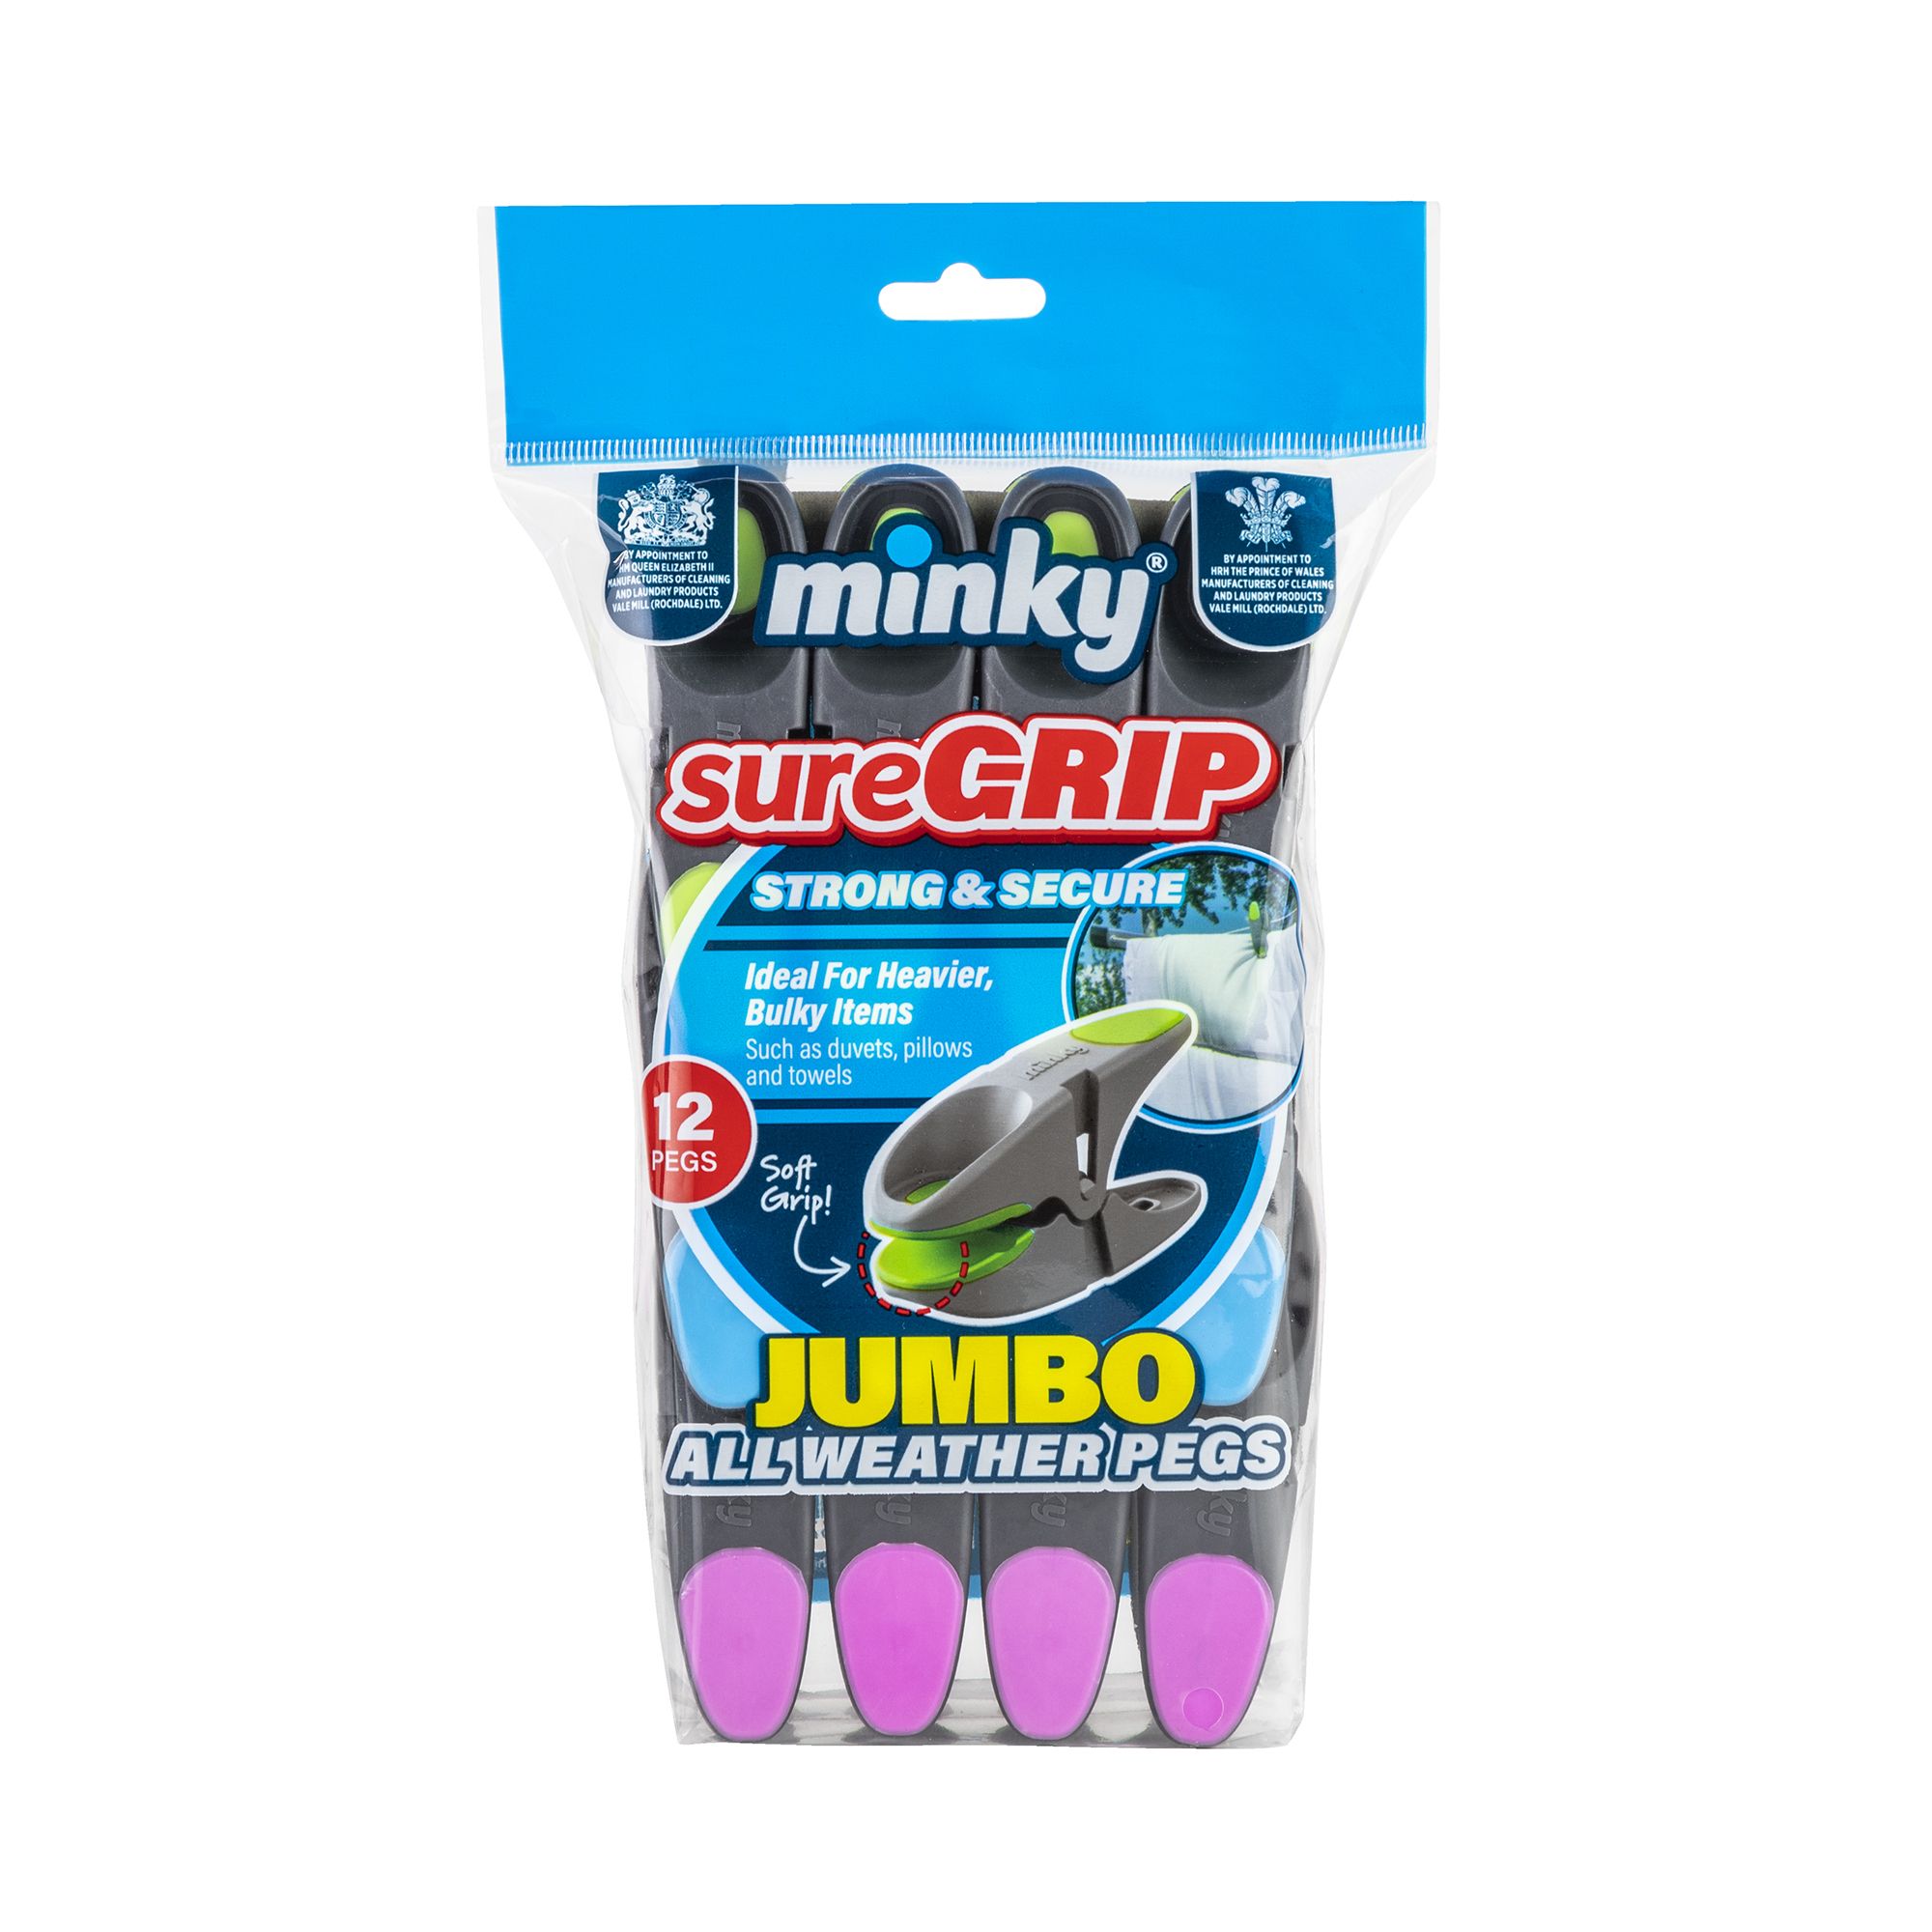 Minky Sure Grip Grey Plastic Clothes pegs, Pack of 12